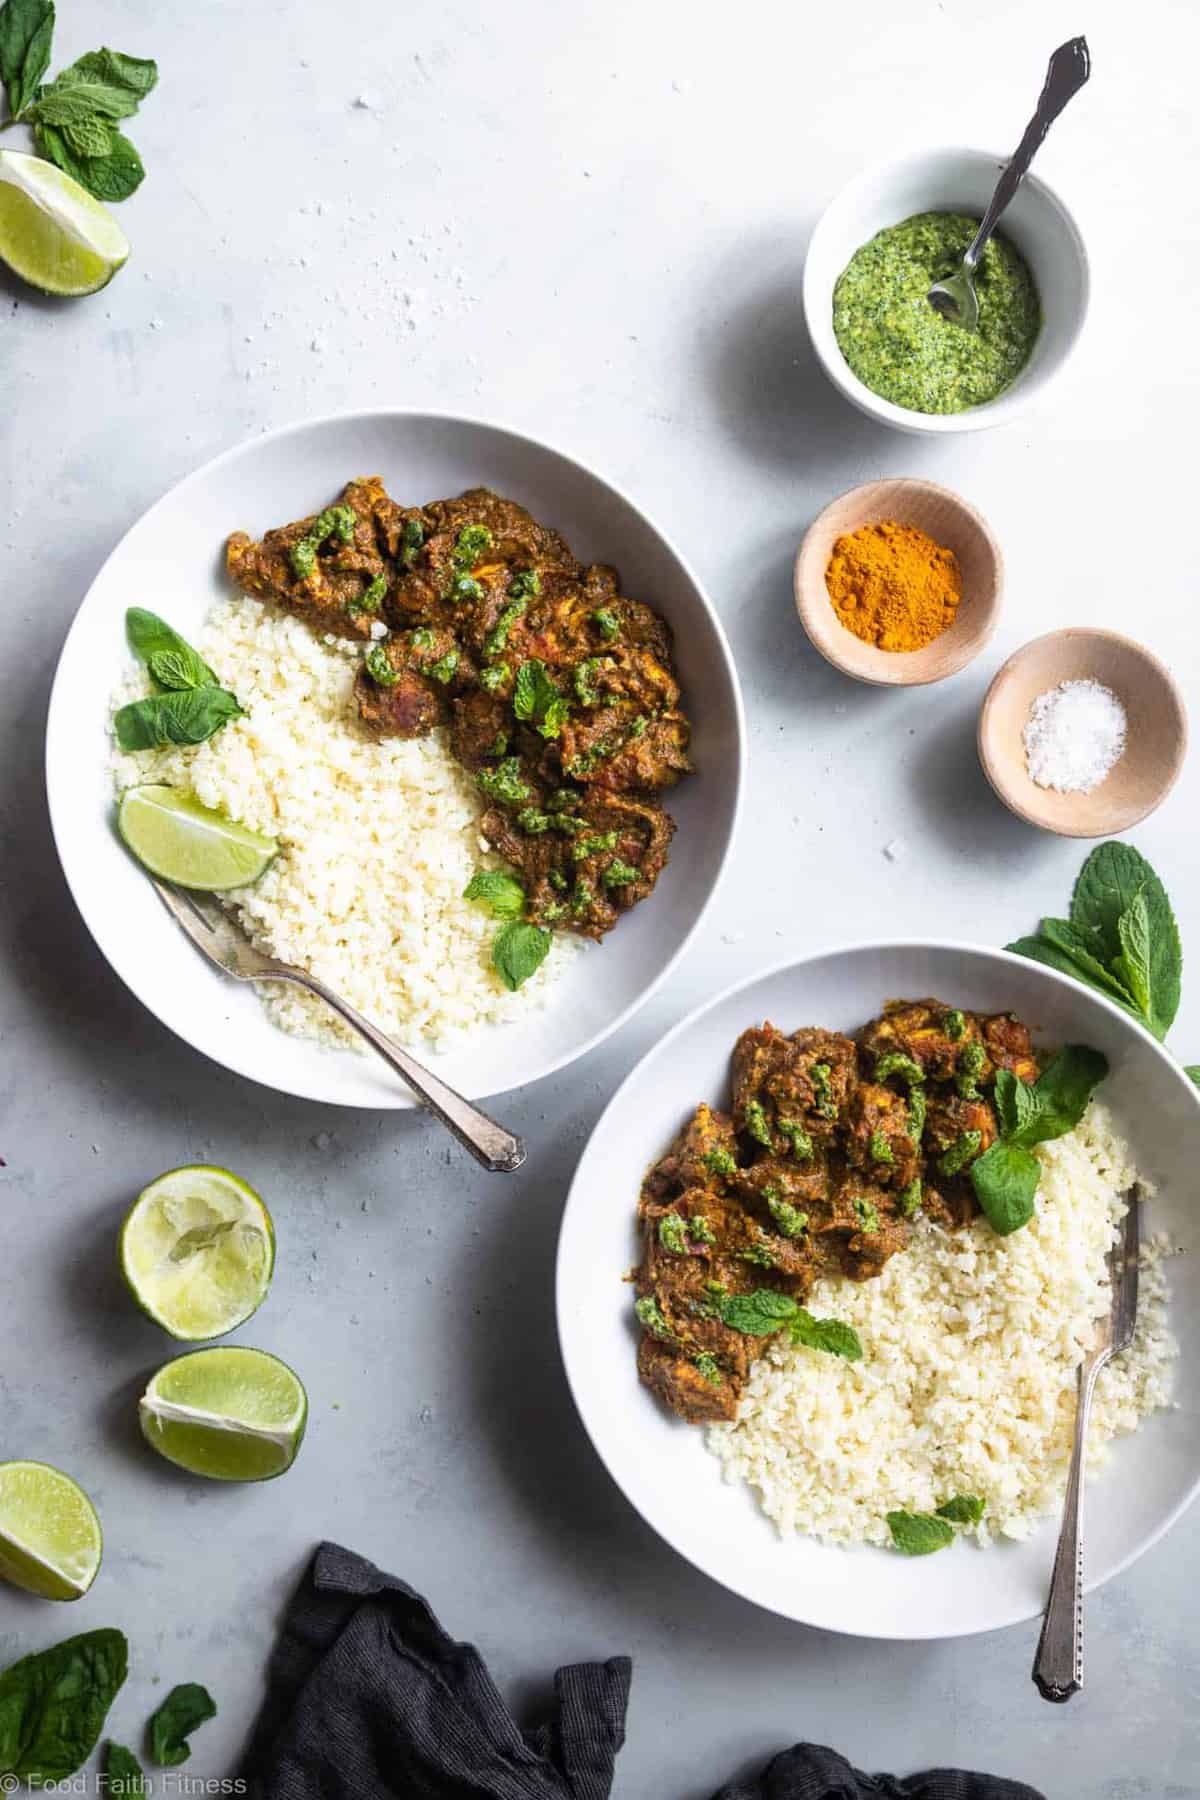 Indian Spiced Chicken with Cashew Cilantro Pesto - This chicken curry with a creamy pesto made of cashews is an easy, weeknight dinner with big bold flavor! Gluten free, paleo, whole30 and low carb too! | #Foodfaithfitness |